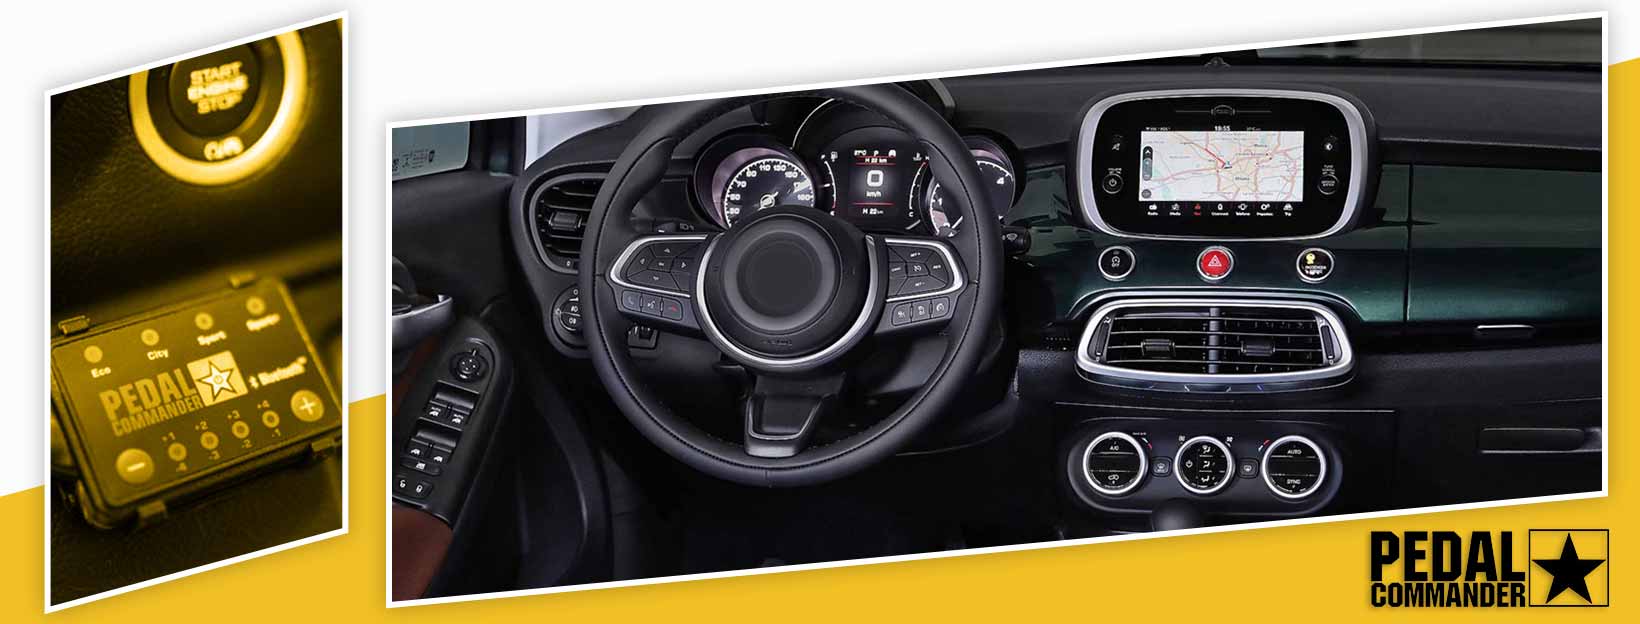 Pedal Commander for Fiat 500x